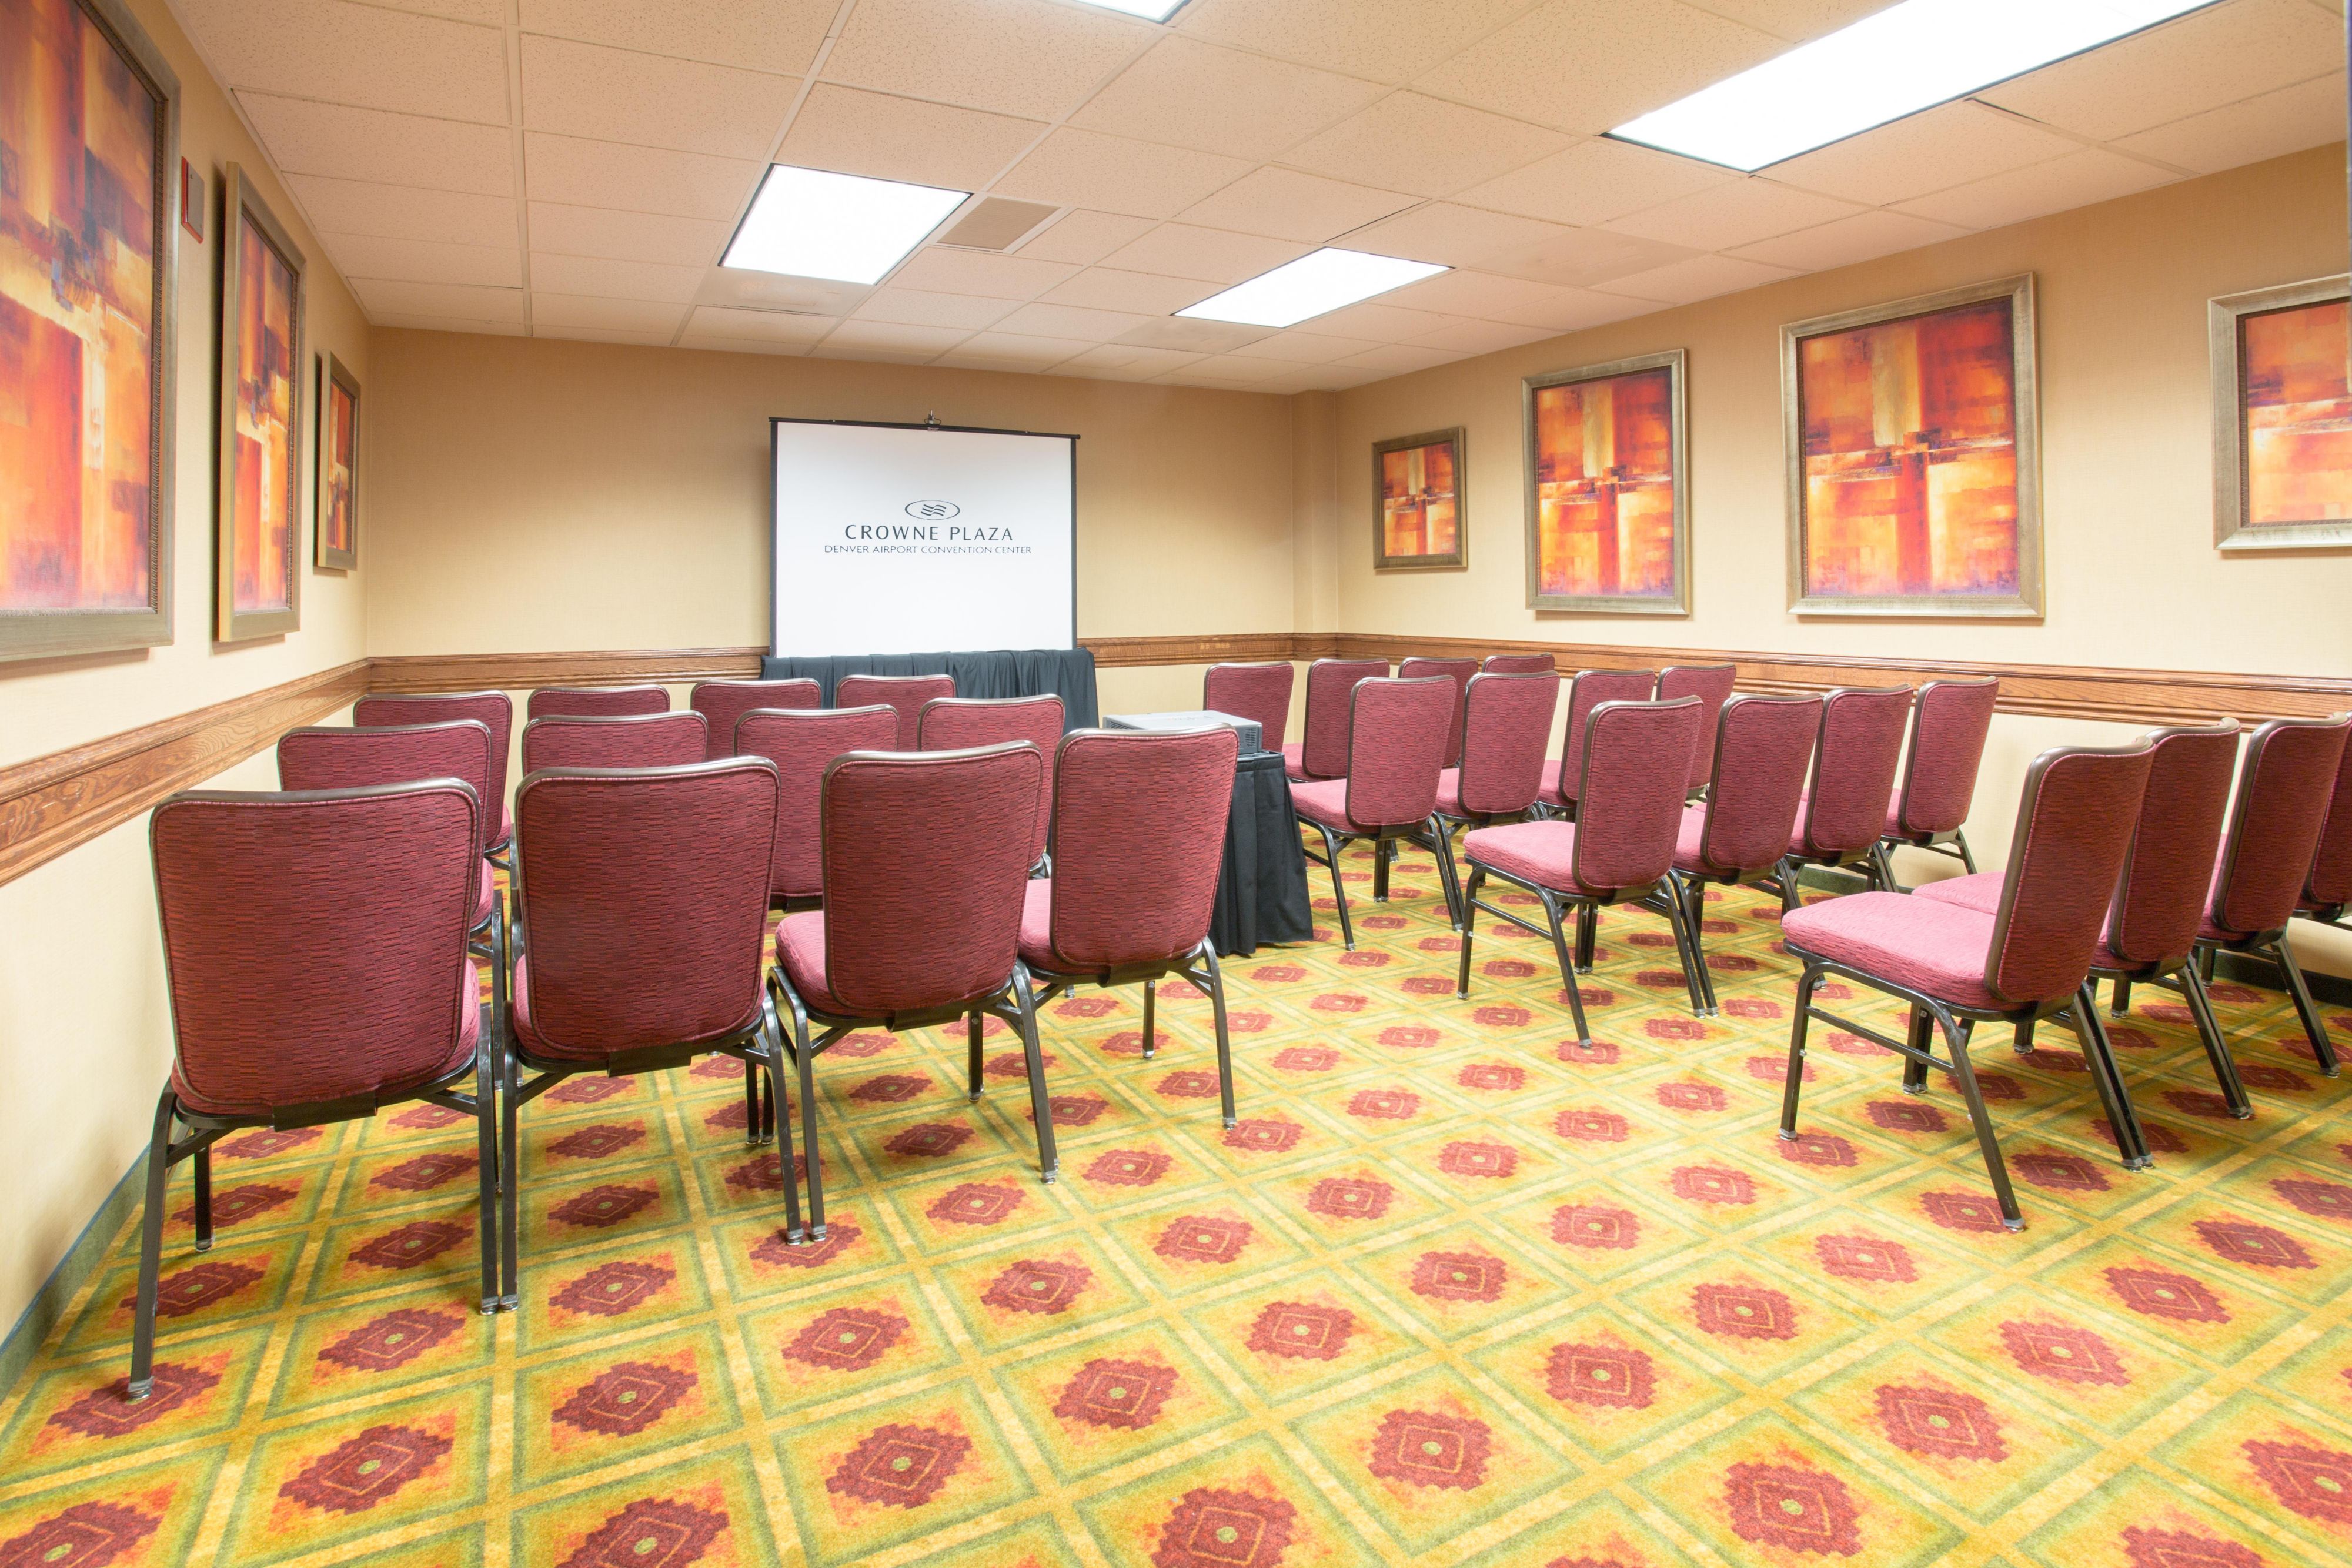 Plan your next small or large meeting at the Crowne Plaza